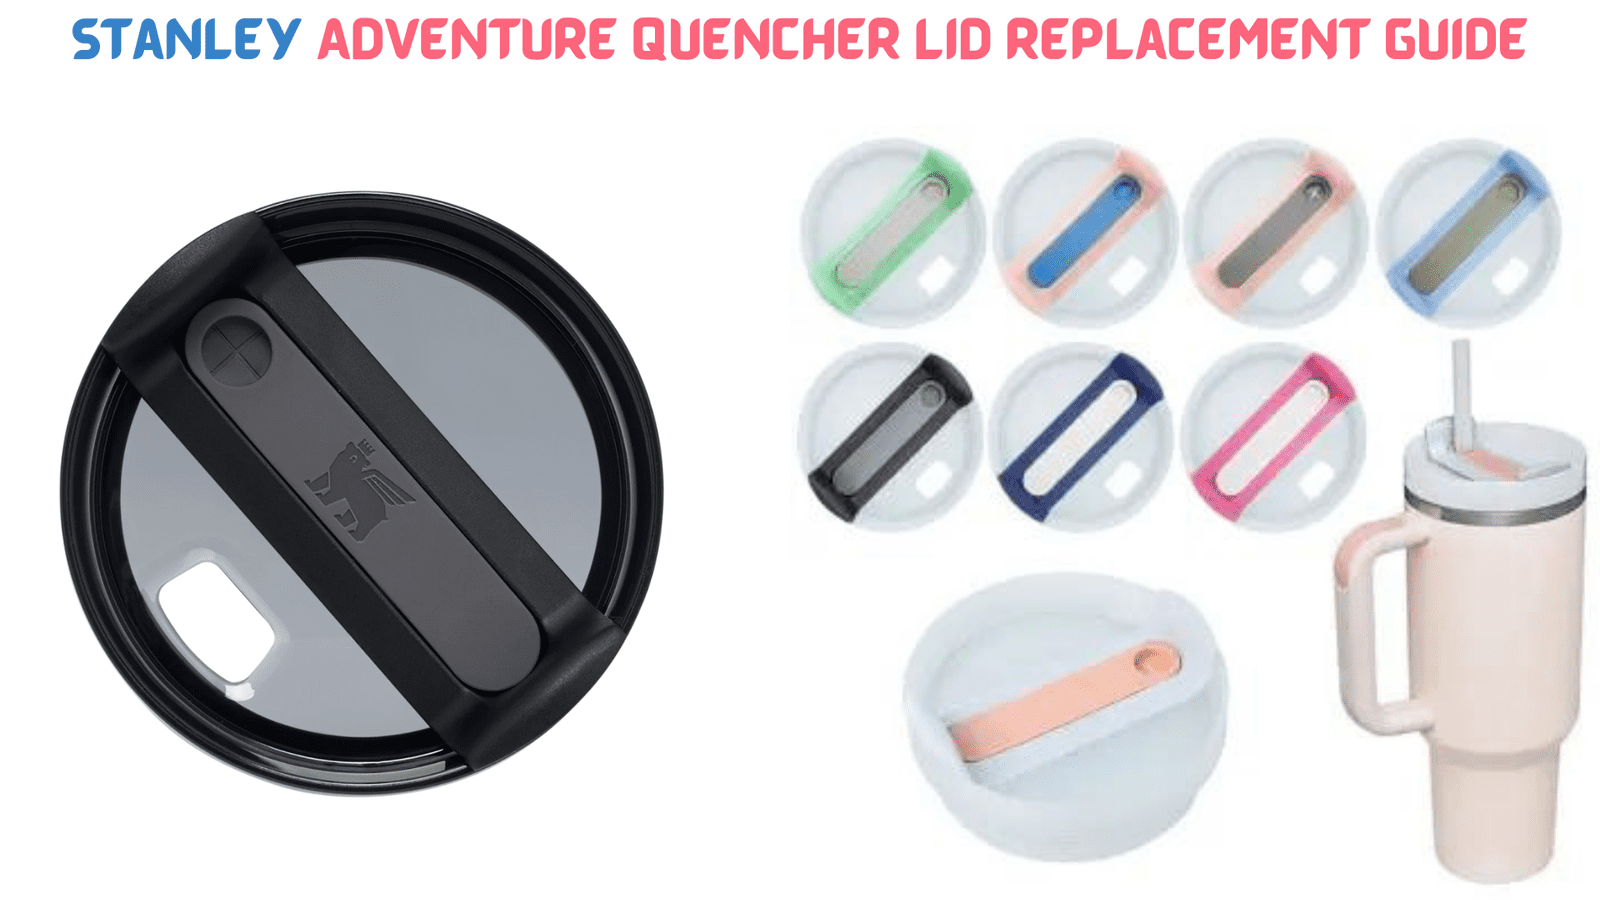 Stanley Adventure Quencher Lid Replacement Guide